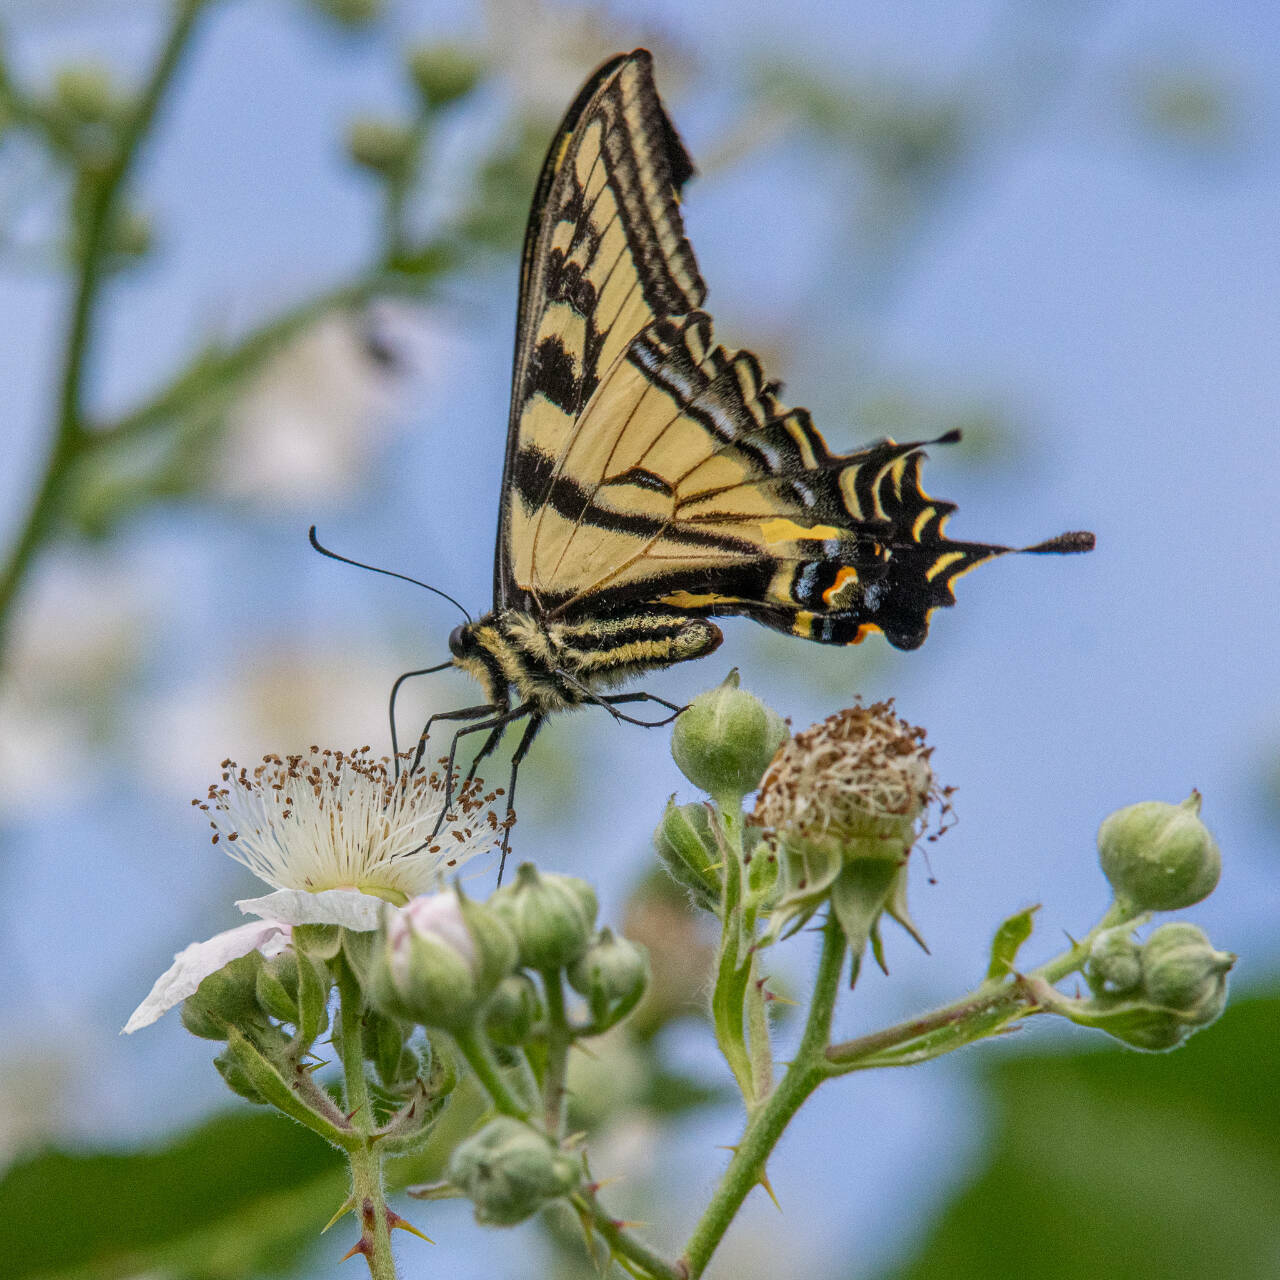 A Western Tiger Swallowtail butterfly drinks the nectar of a Himalayan blackberry flower in late June in Sequim. These butterflies live in their adult form for a month to a month-and-a-half, with the males emerging first — usually in May — and the females around for longer, usually into July.